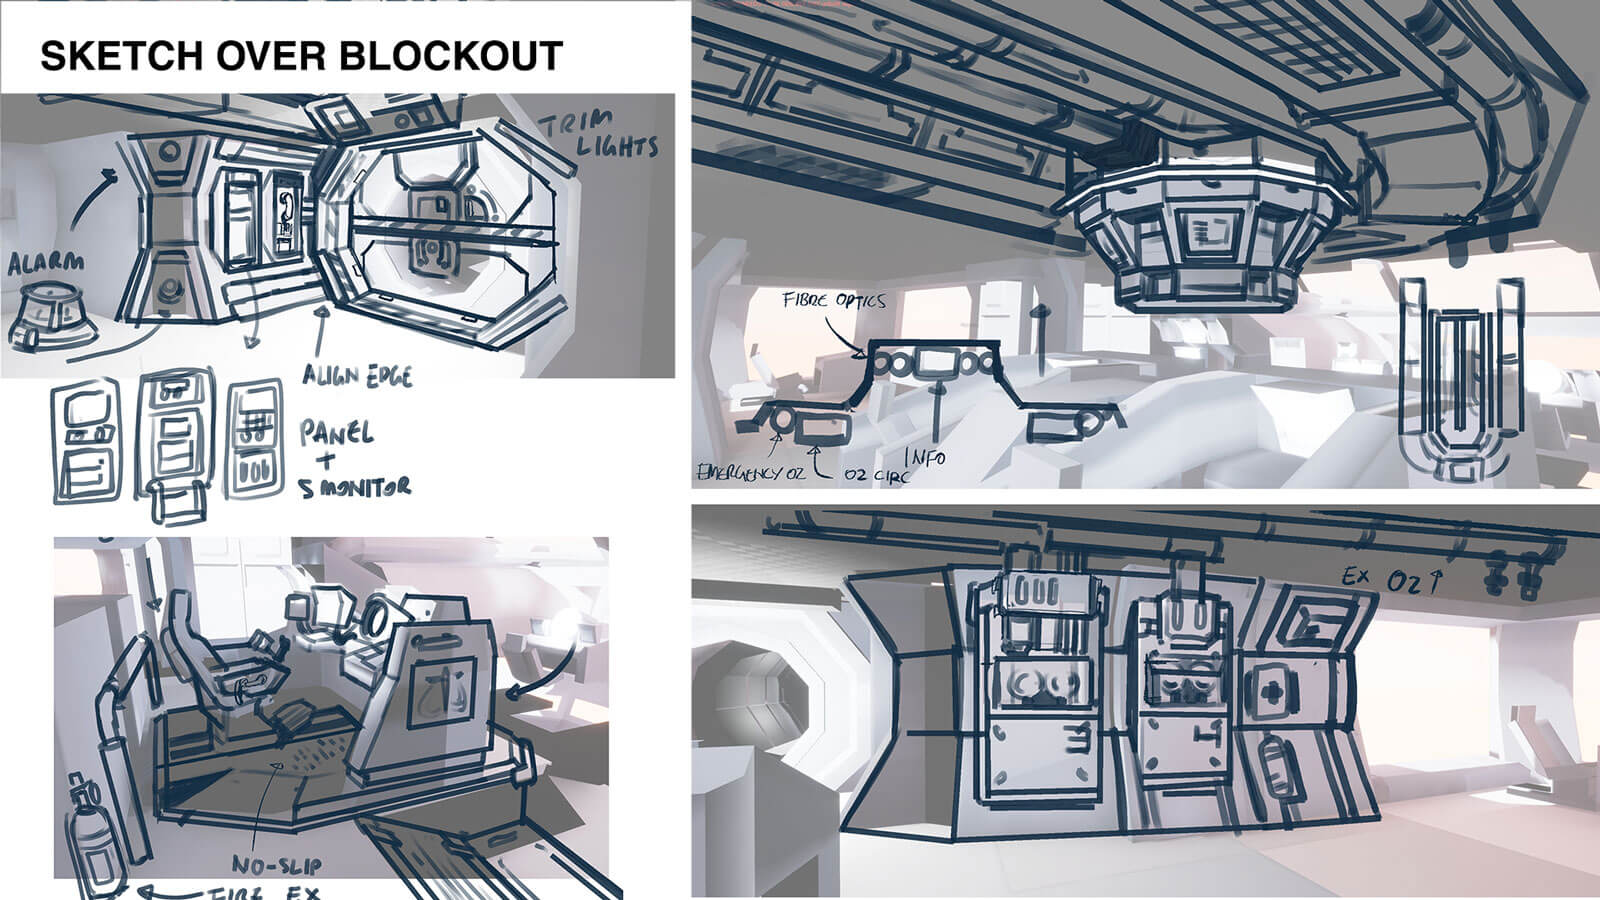 A sketch over blockout of what the inside of the cockpit should look like